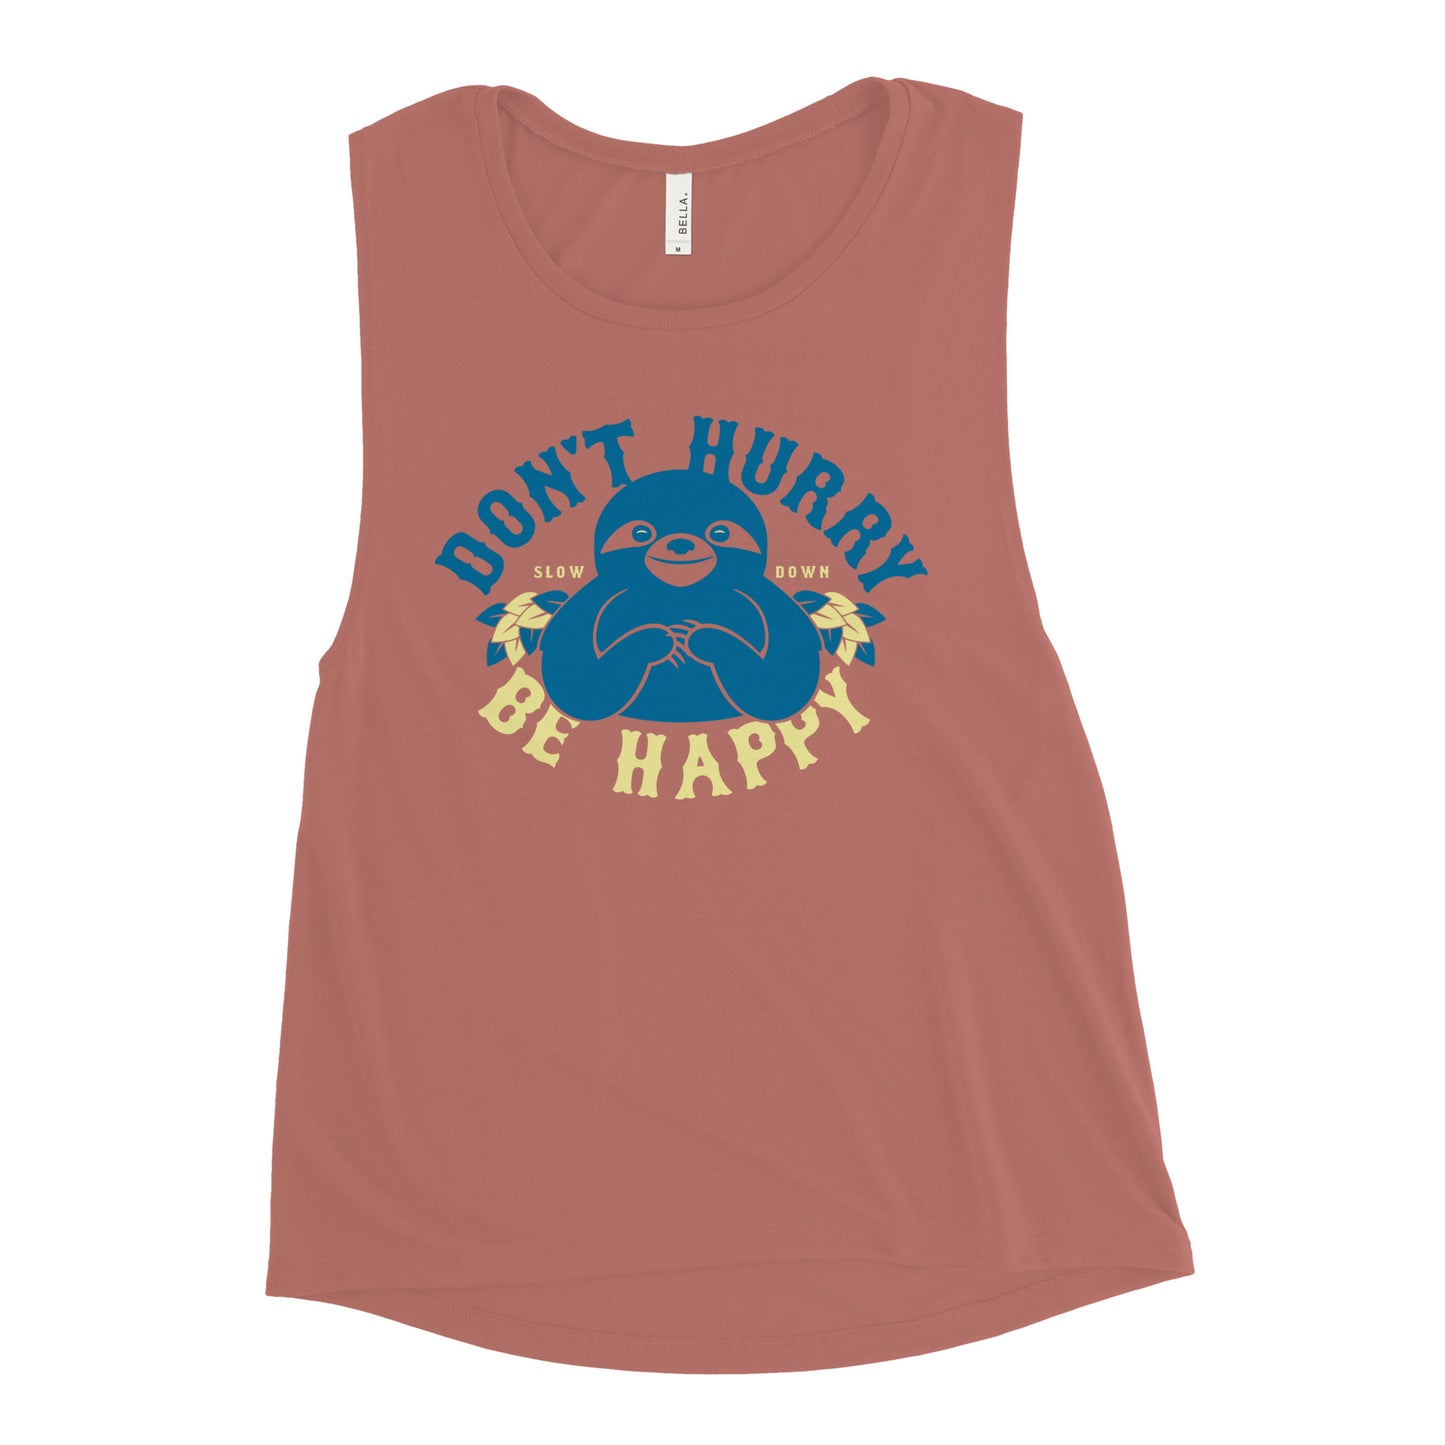 Don't Hurry Be Happy Women's Muscle Tank